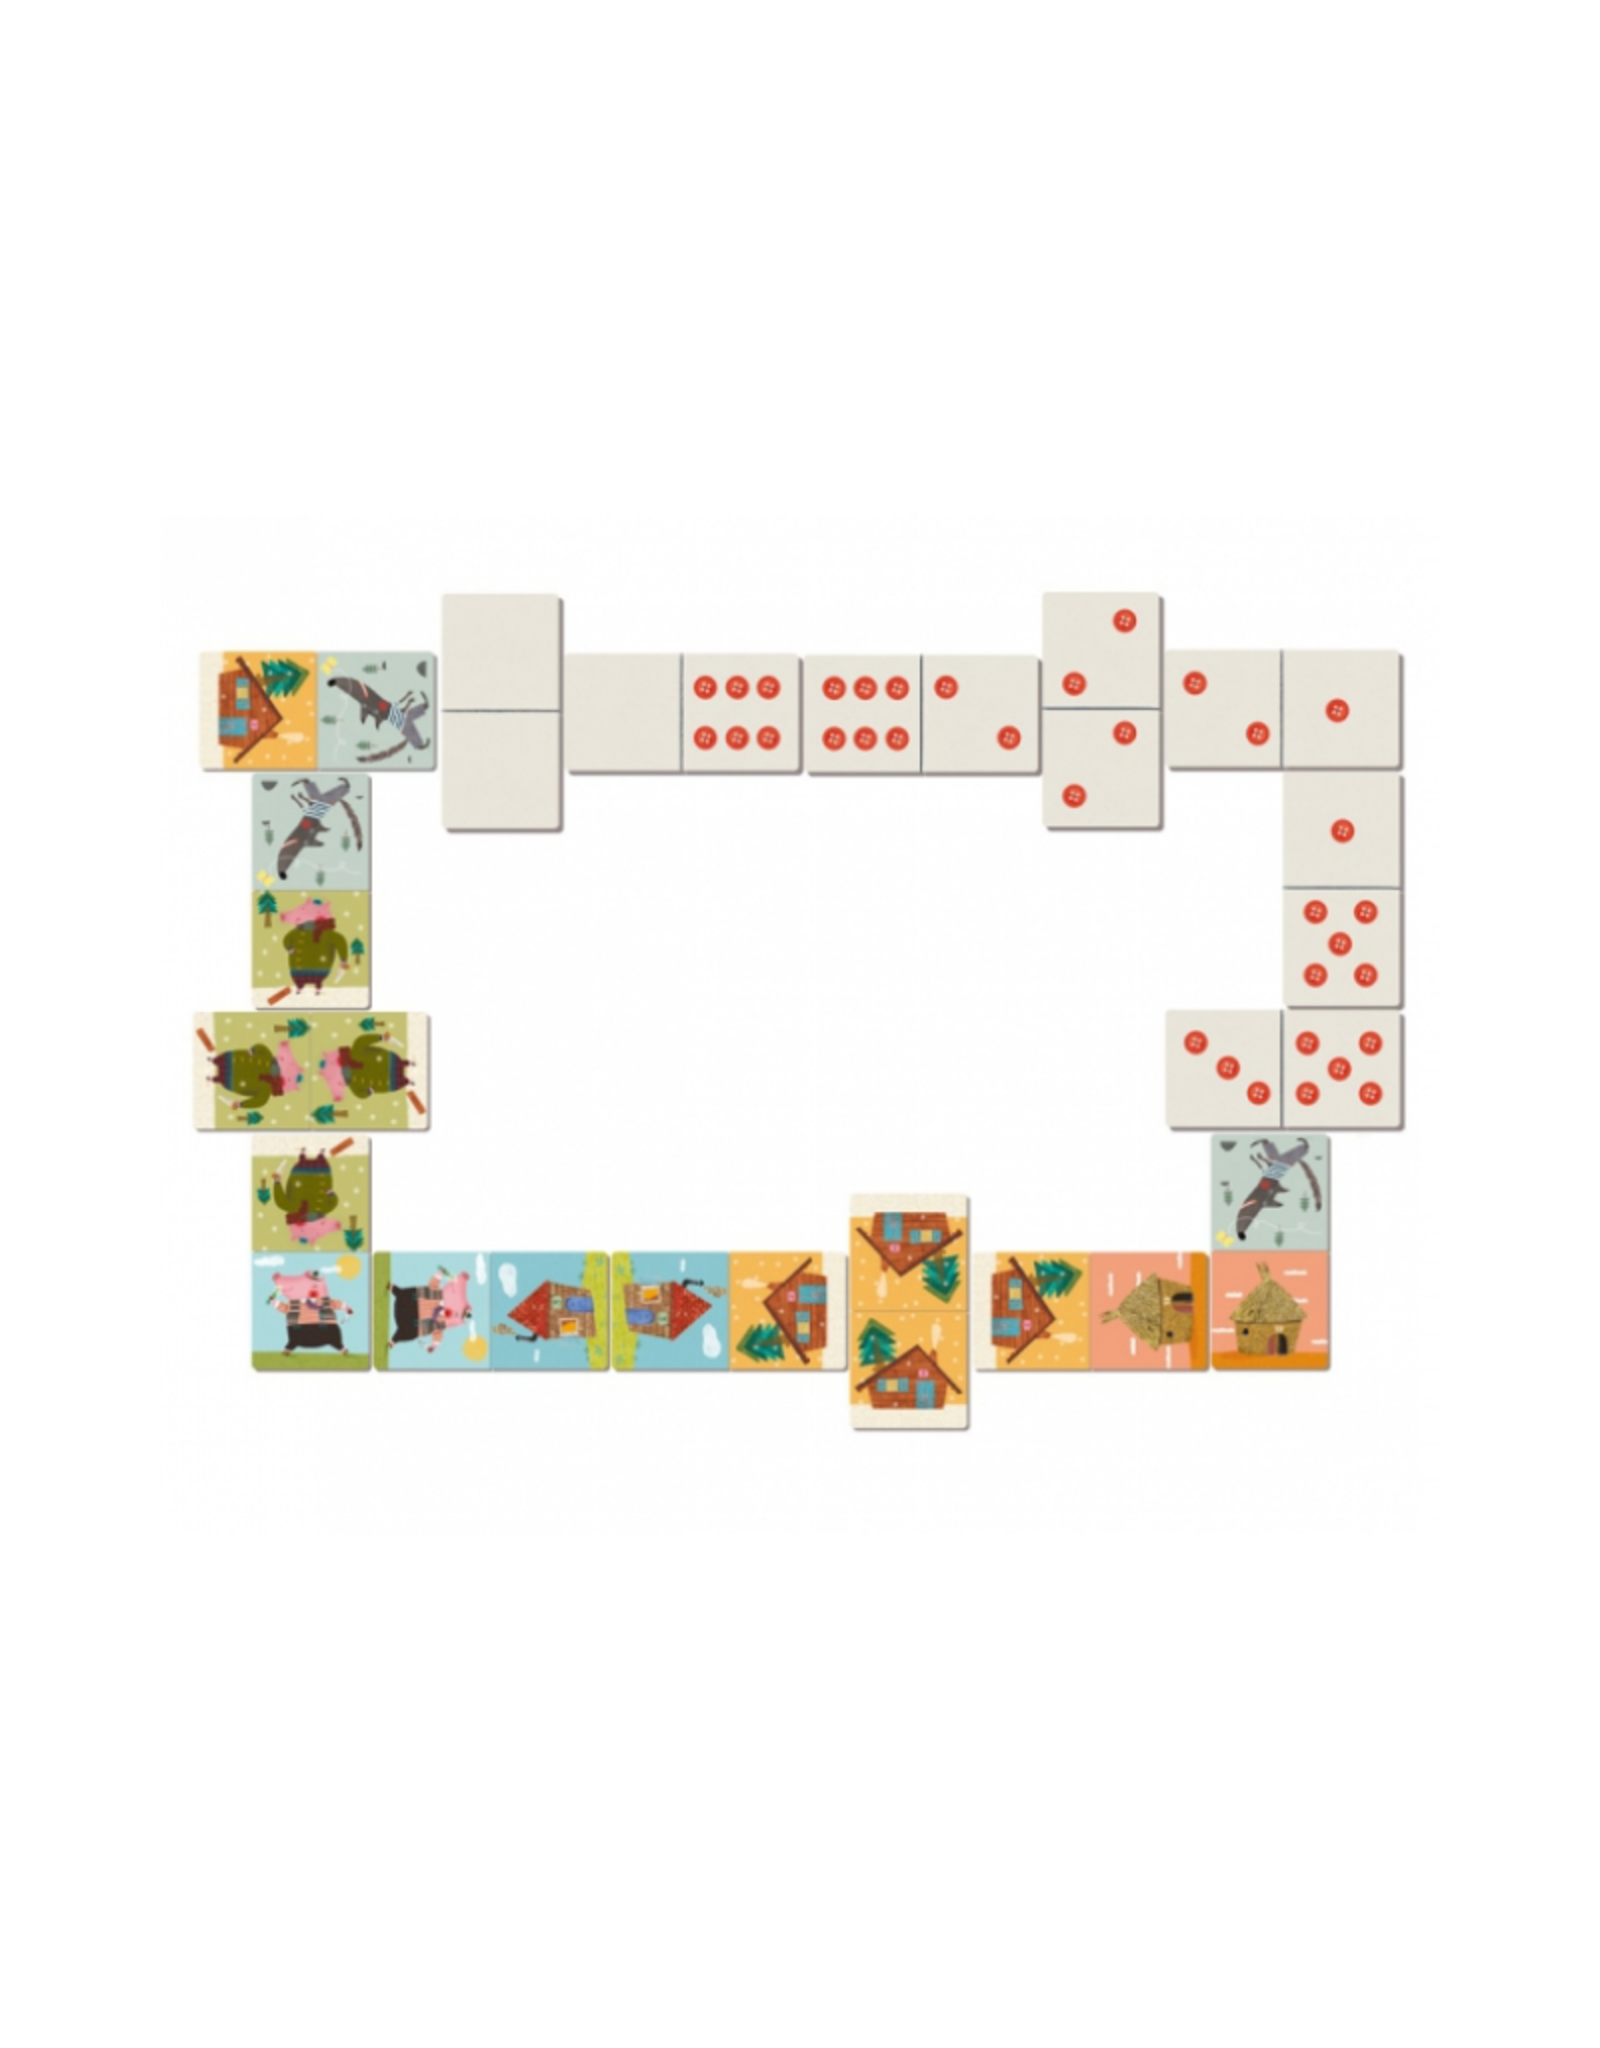 Three Little Pigs Domino Game